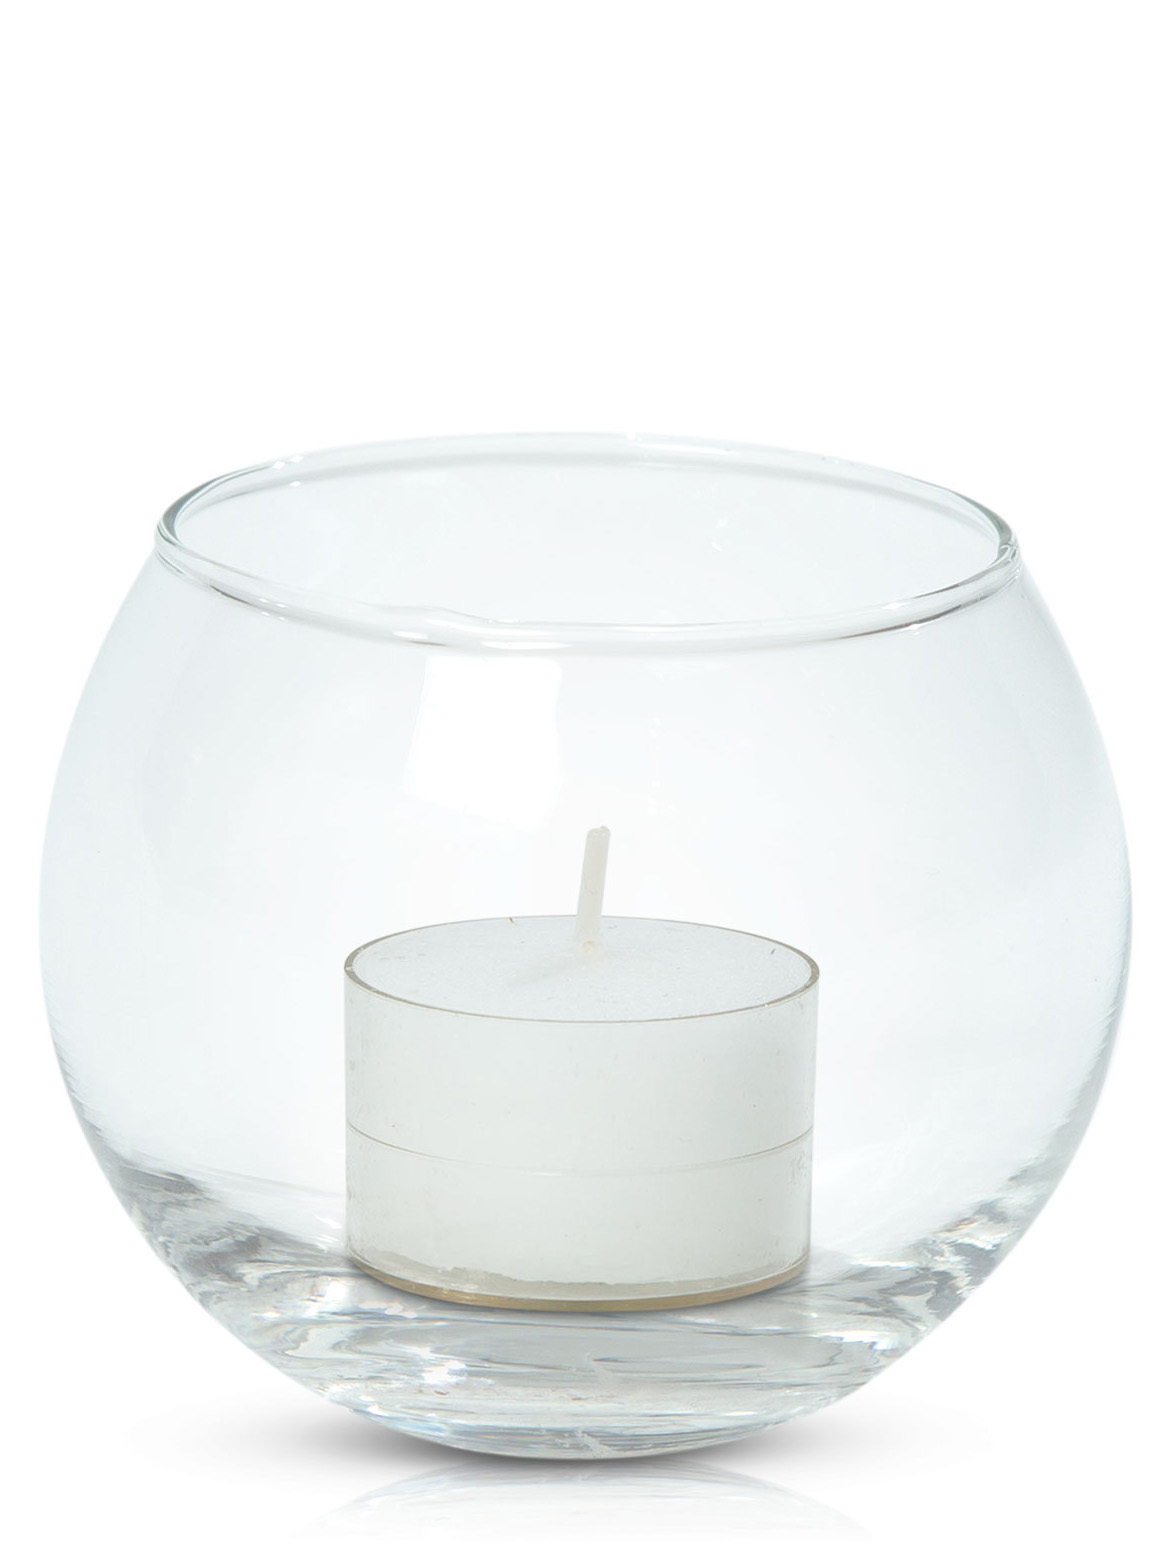 Acrylic Cup Tealight in Fishbowl Pack